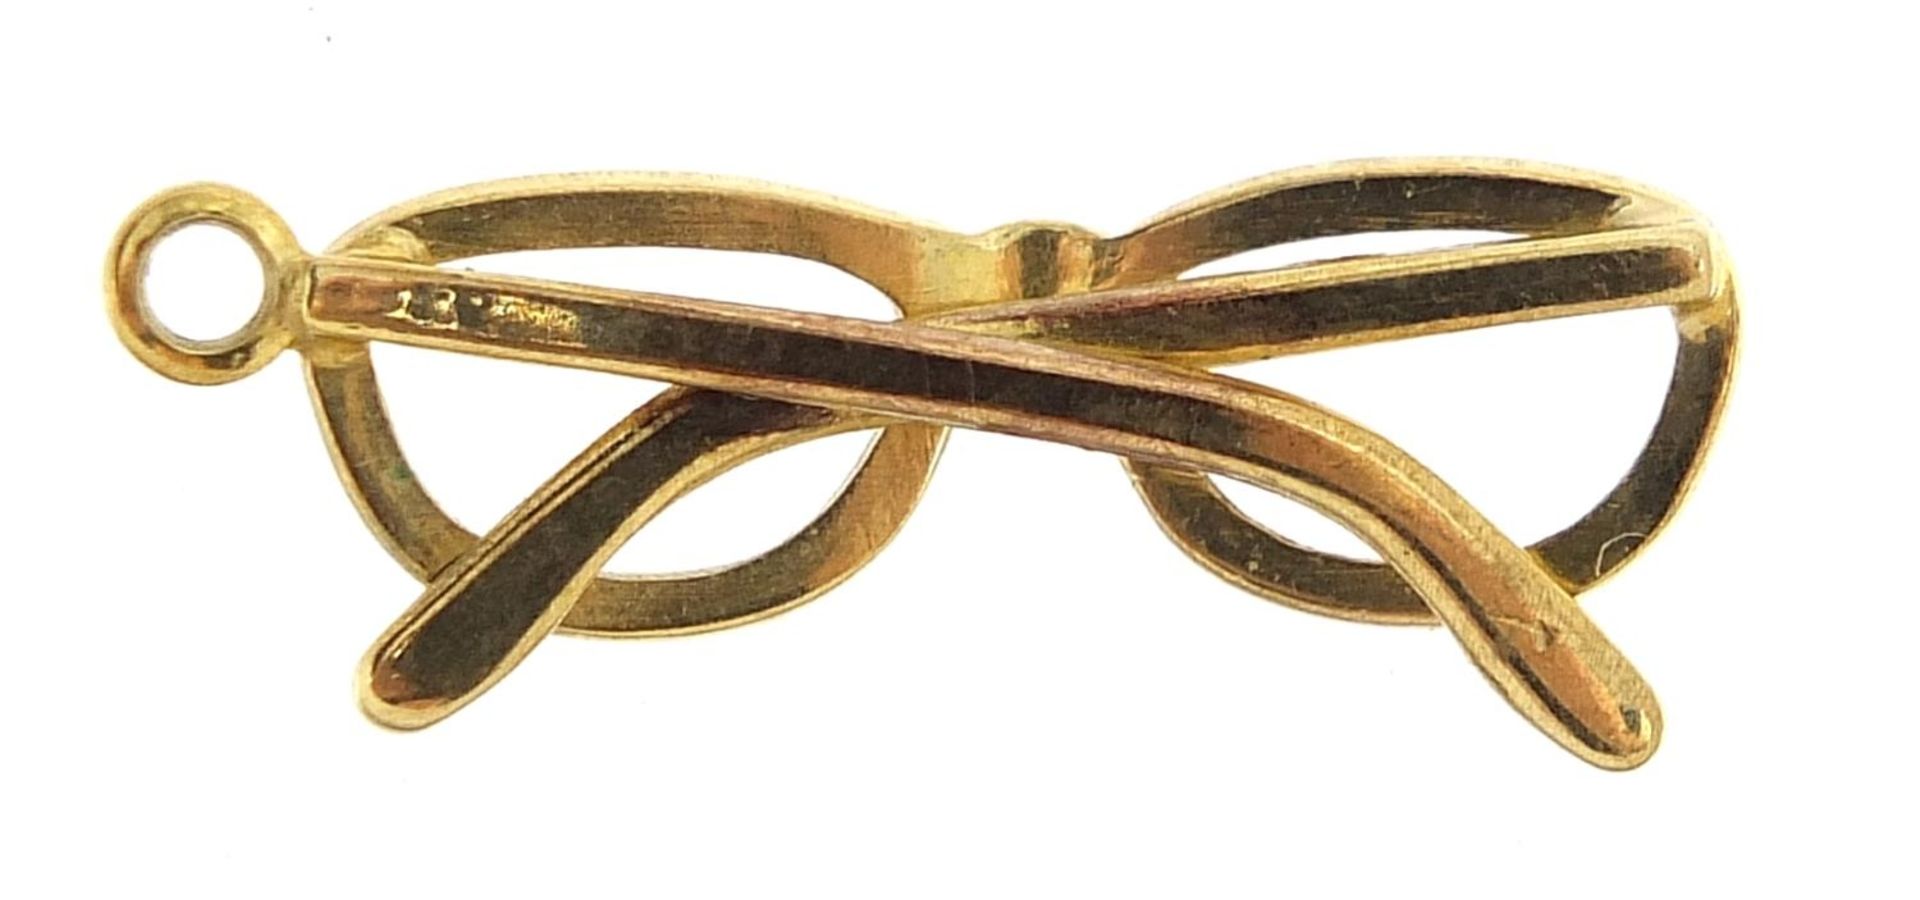 Unmarked gold pair of spectacles charm, (tests as 9ct gold) 2.2cm high, 1.3g - Image 2 of 2